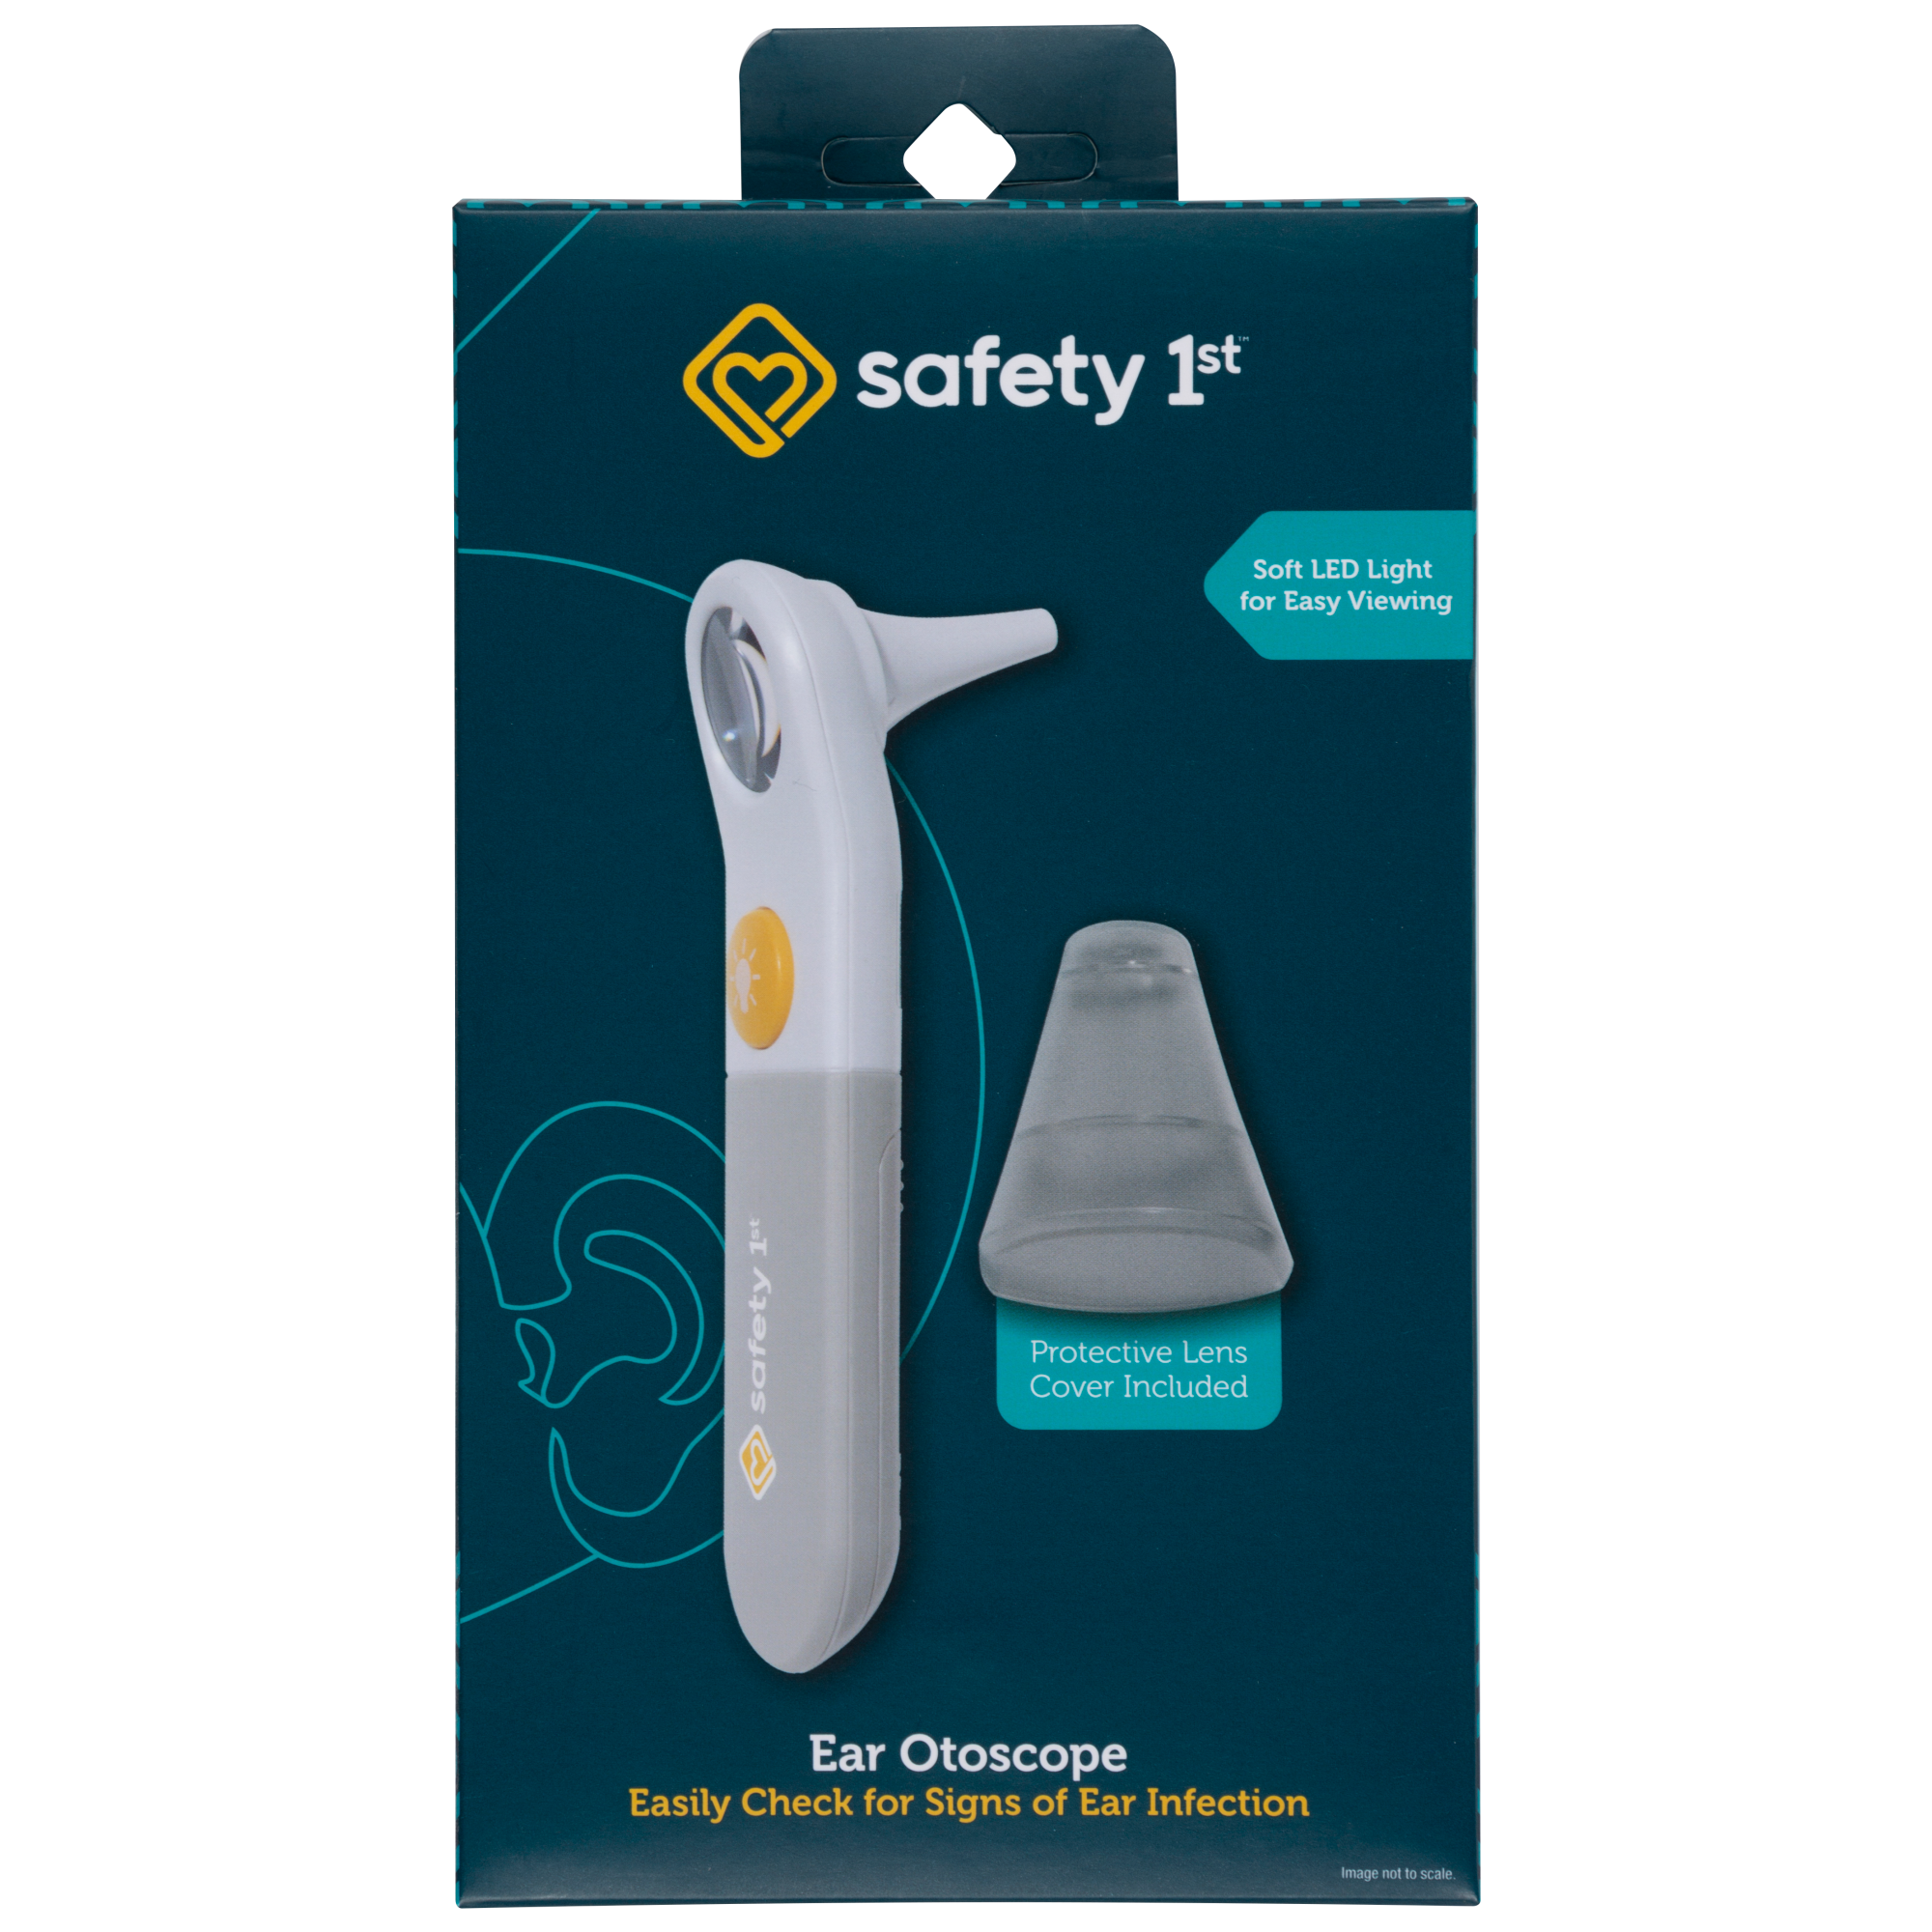 Ear Otoscope in packaging - easily check for signs of ear infection